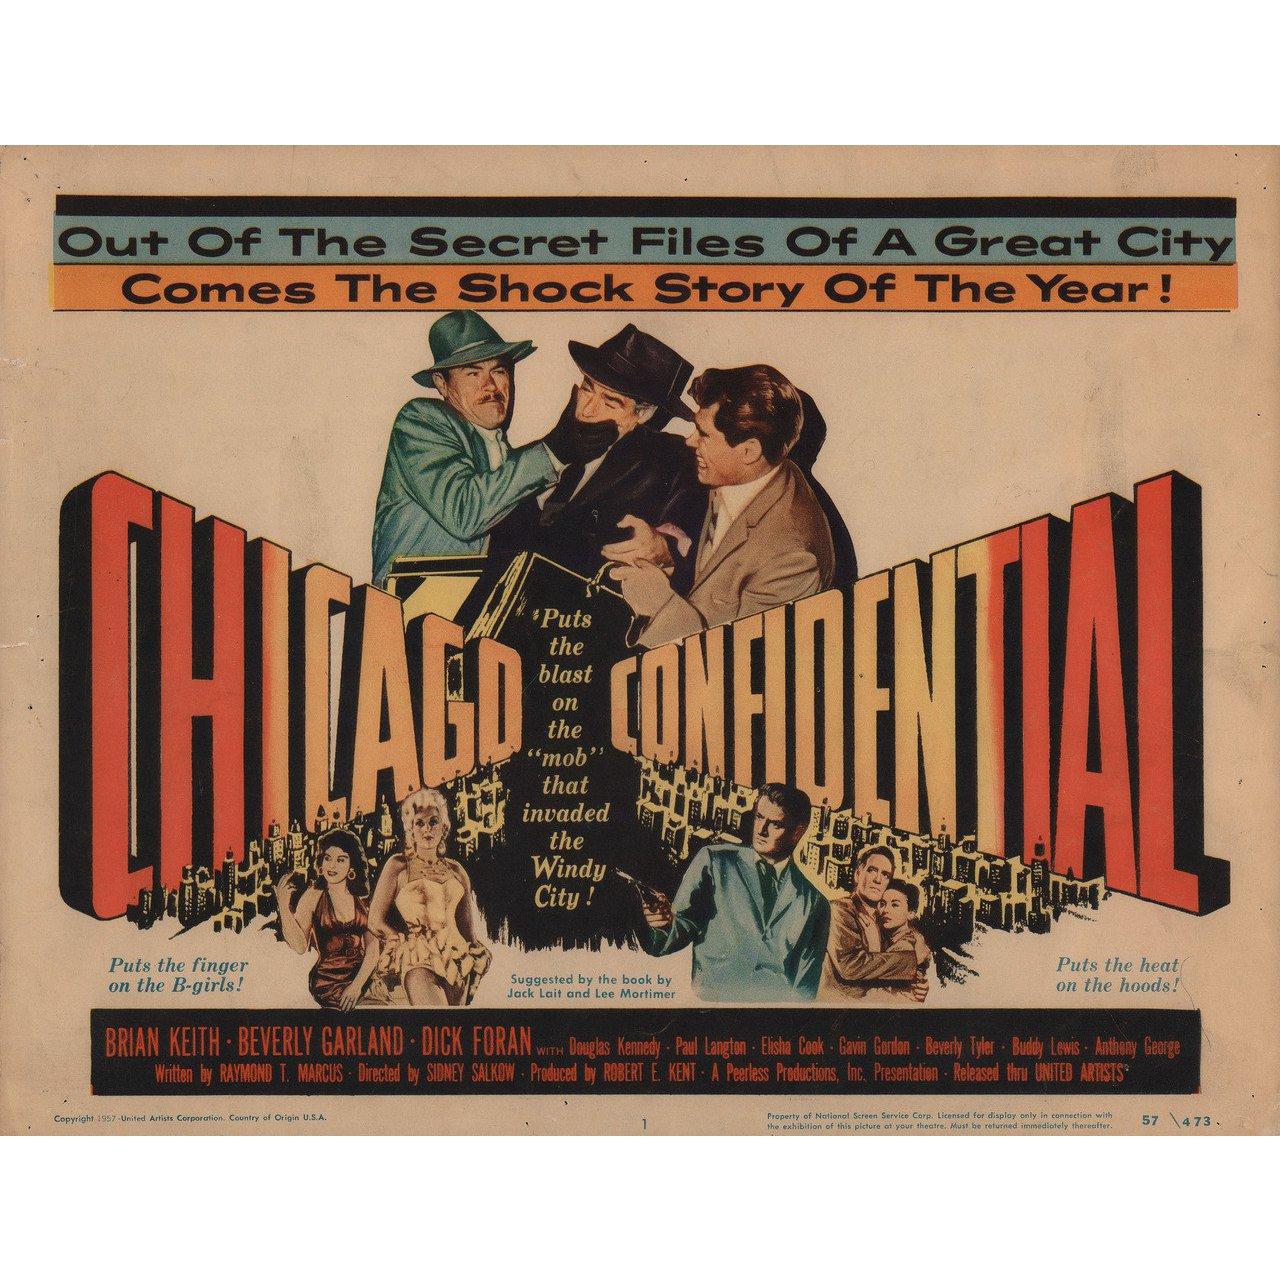 Original 1957 U.S. title card for the film Chicago Confidential directed by Sidney Salkow with Brian Keith / Beverly Garland / Dick Foran / Douglas Kennedy. Very good-fine condition. Please note: the size is stated in inches and the actual size can